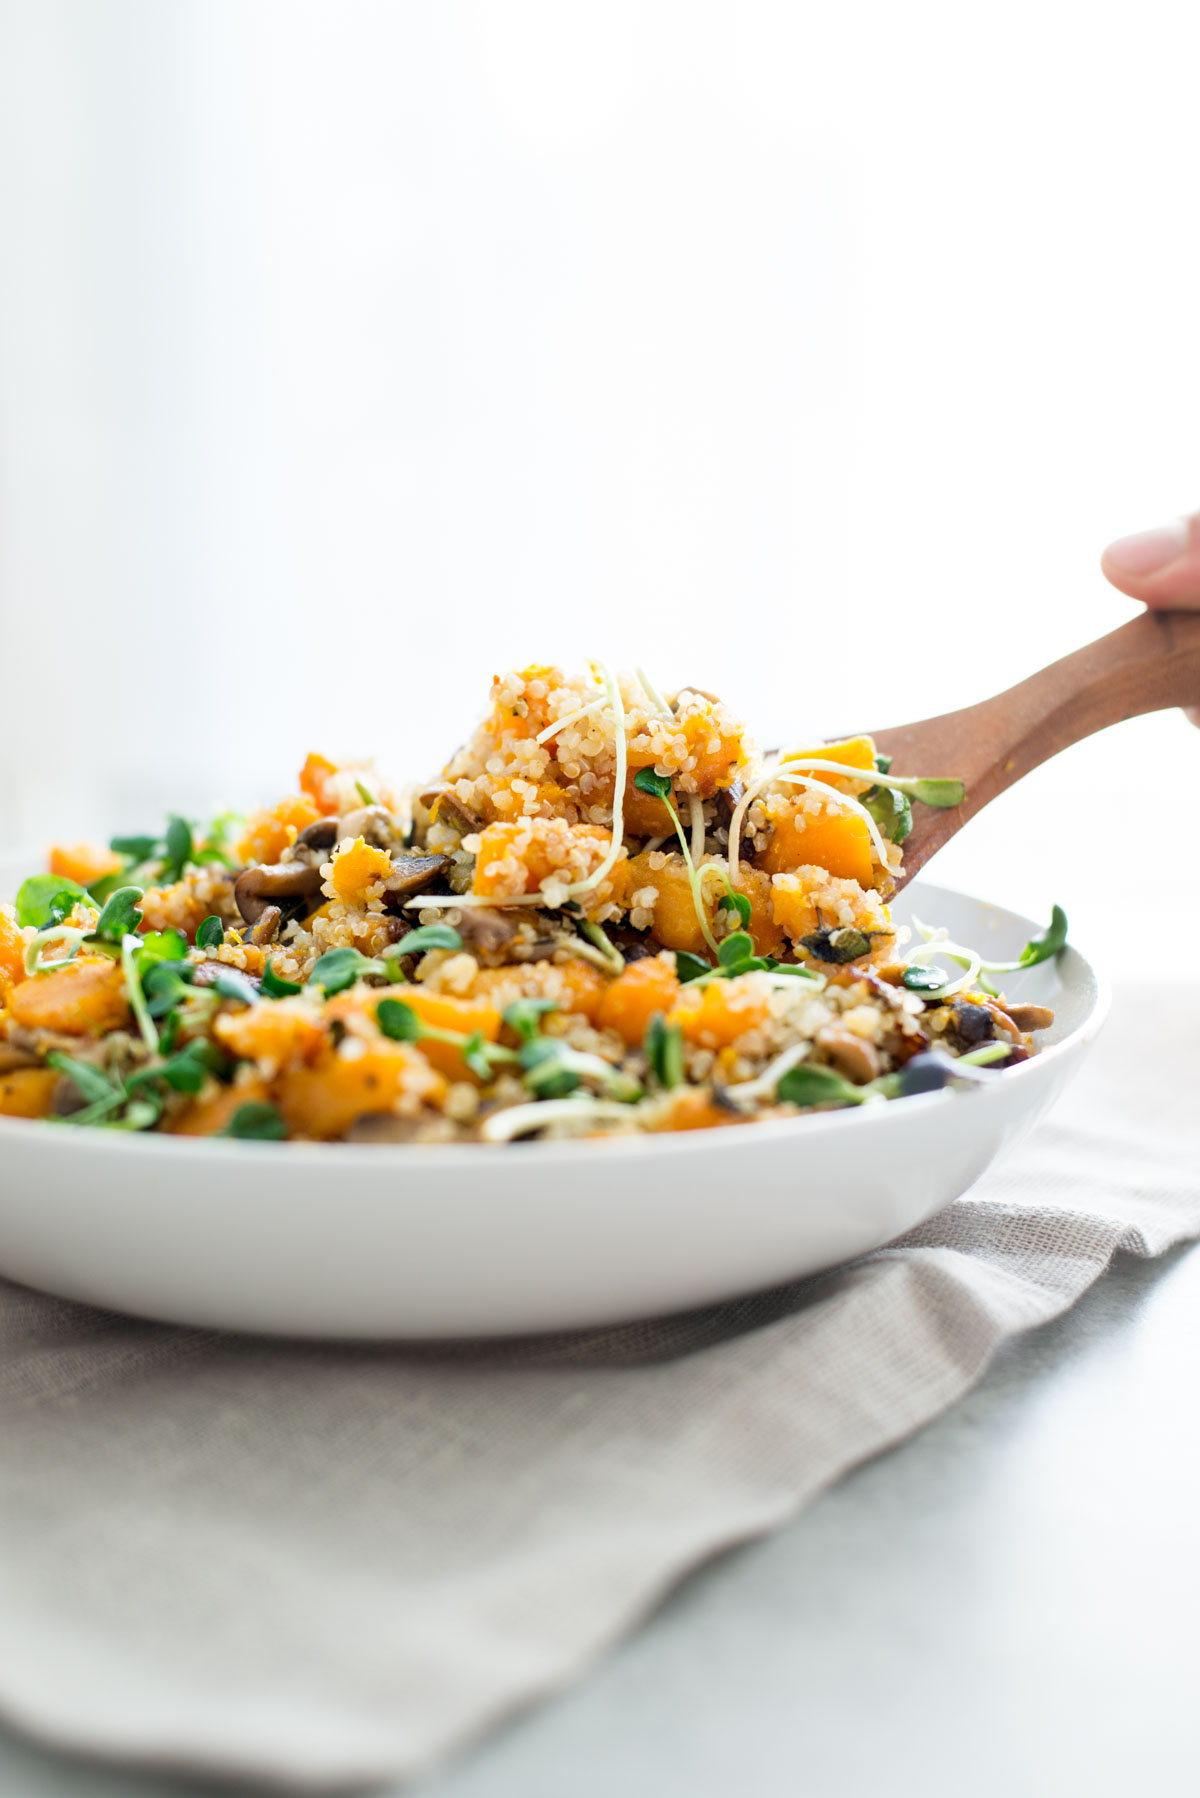 Did you know you shouldn't eat cold salads and smoothies during the fall and winter? Learn more and this delicious recipe for a warm butternut squash quinoa sald